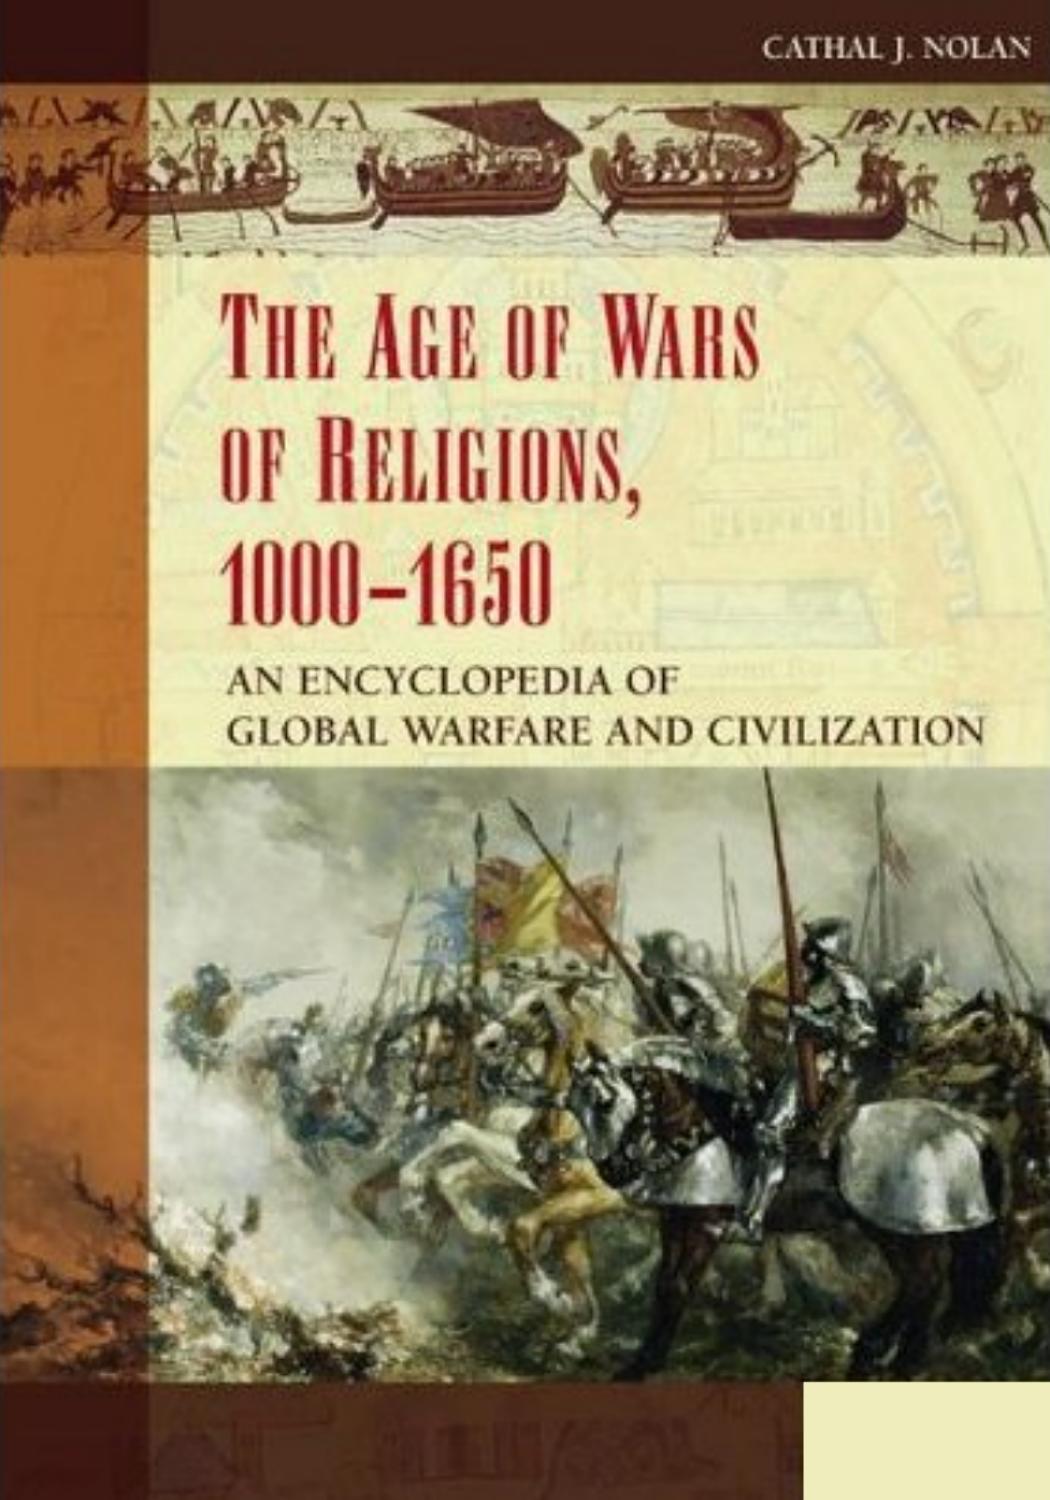 The Age of Wars of Religion, 1000-1650: An Encyclopedia of Global Warfare and Civilization